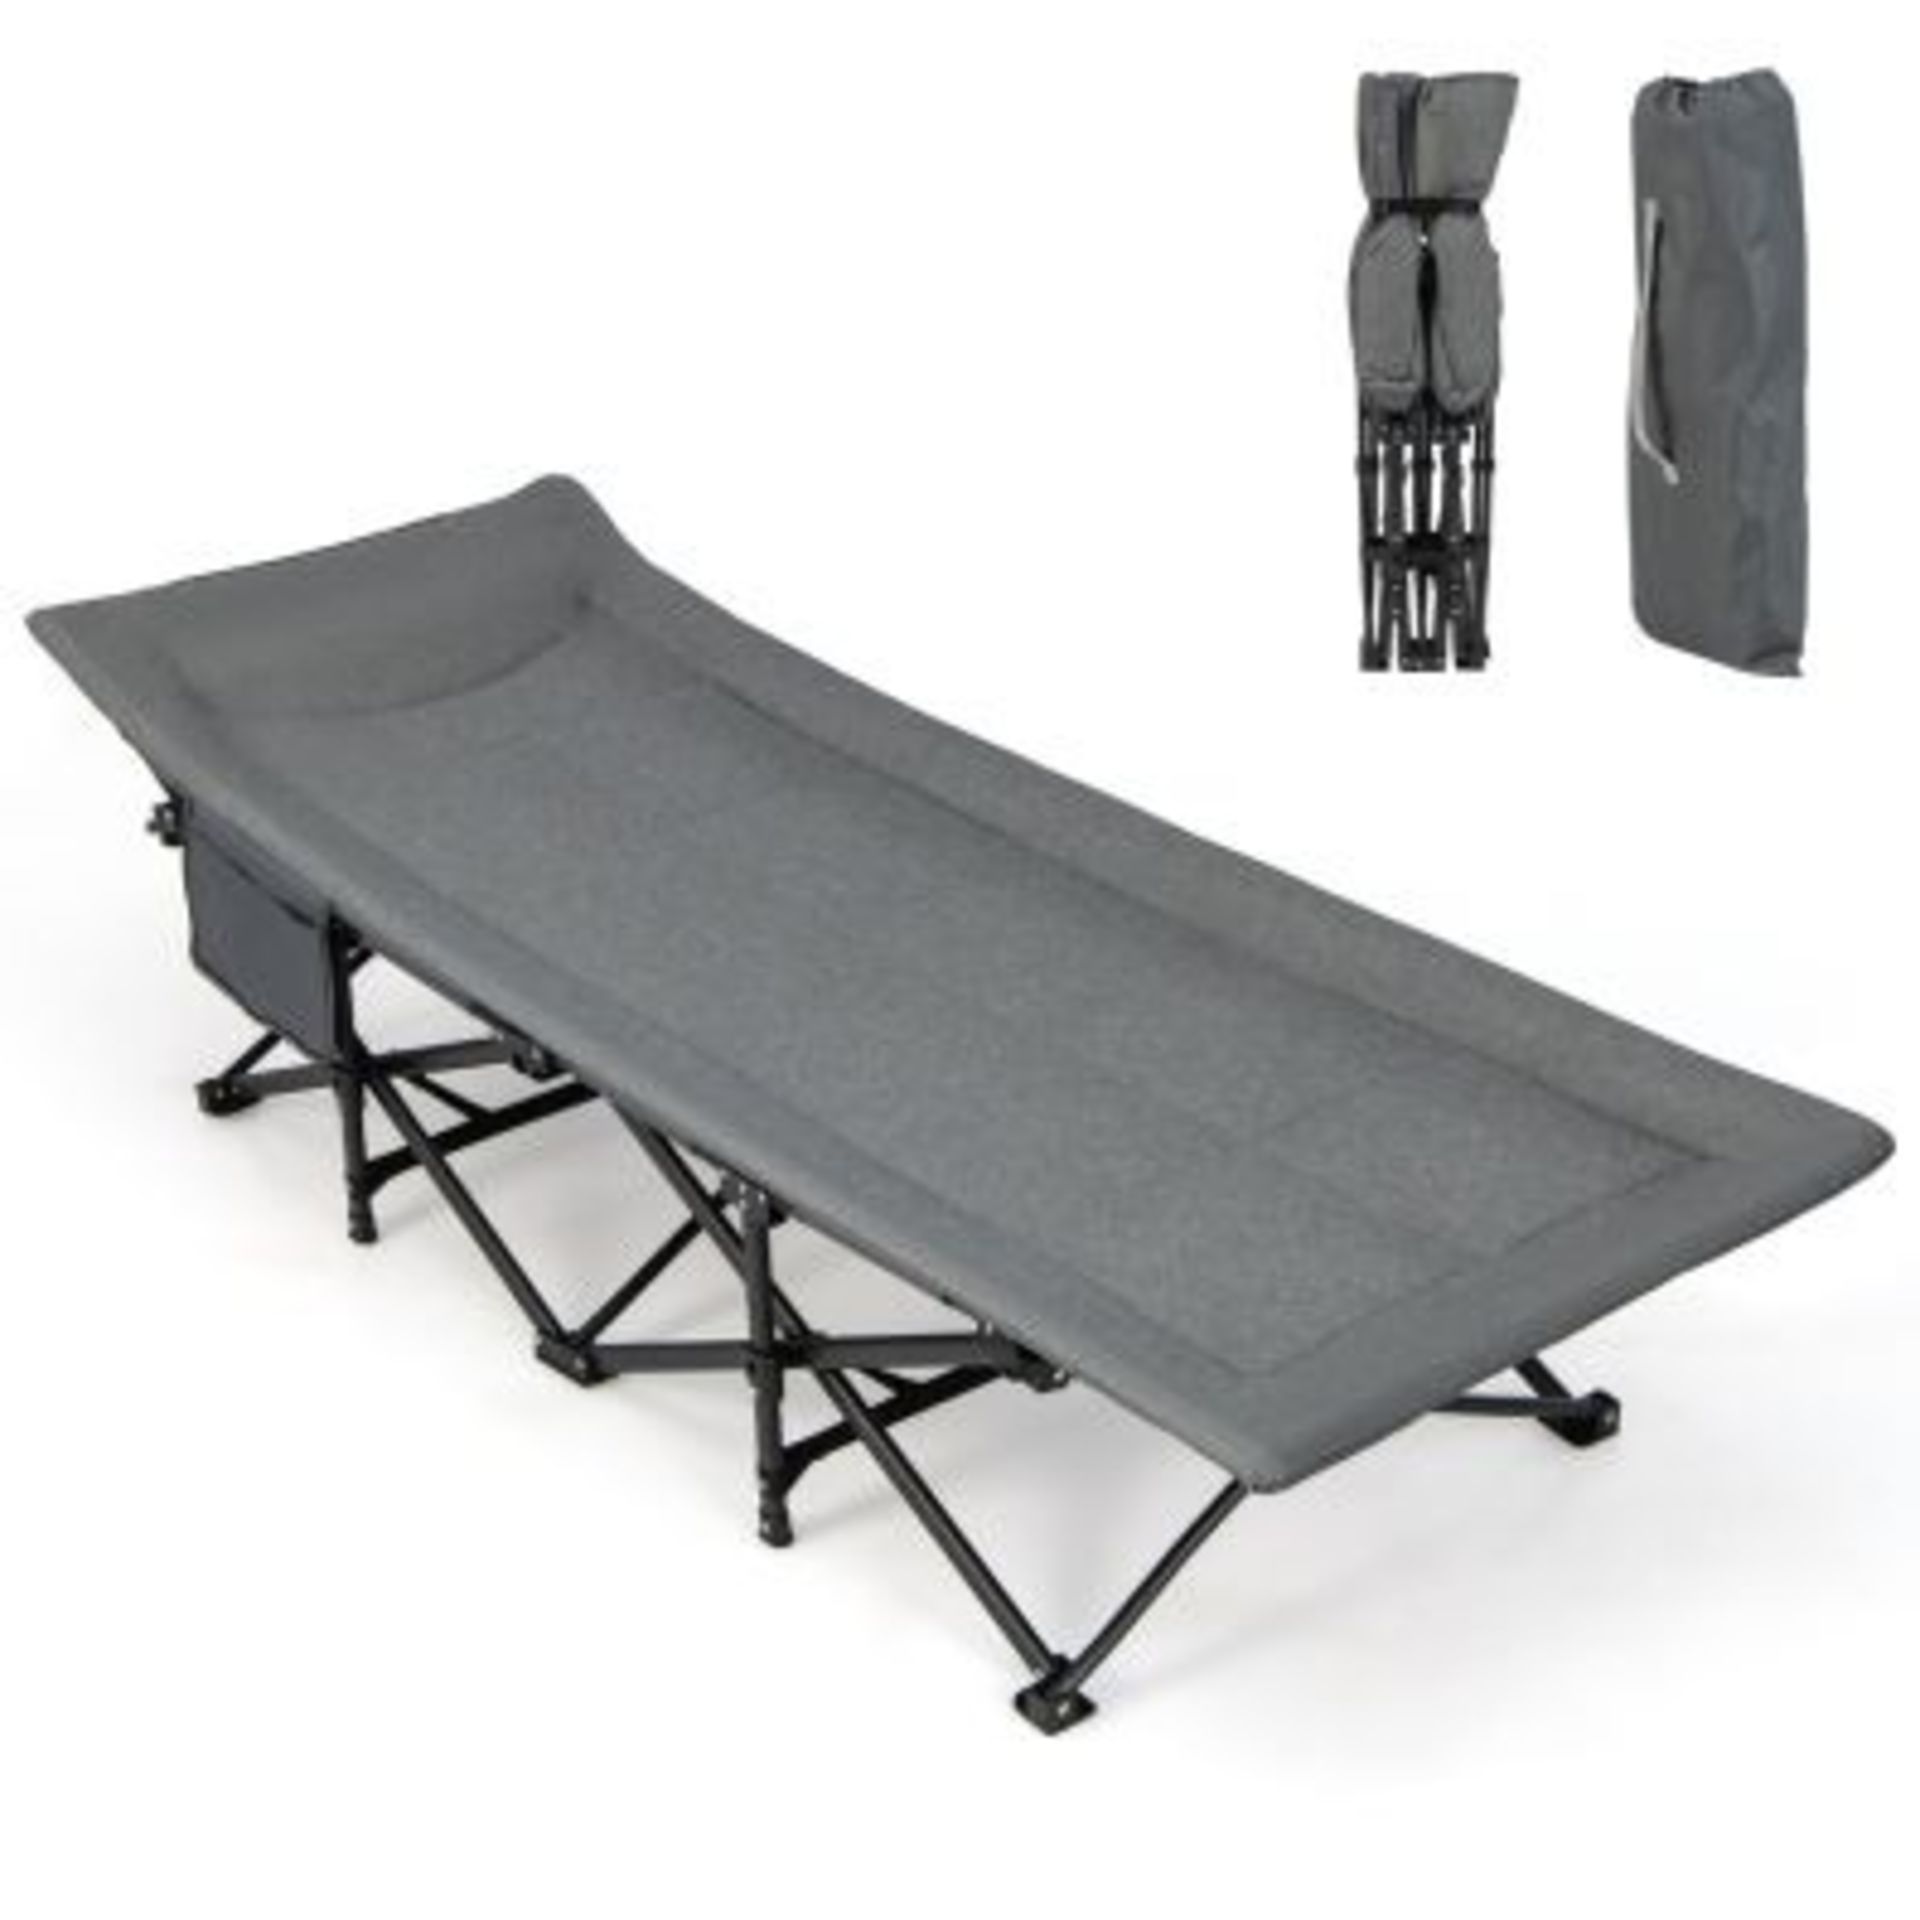 Sleeping Cot Bed with Carry Bag - ER54